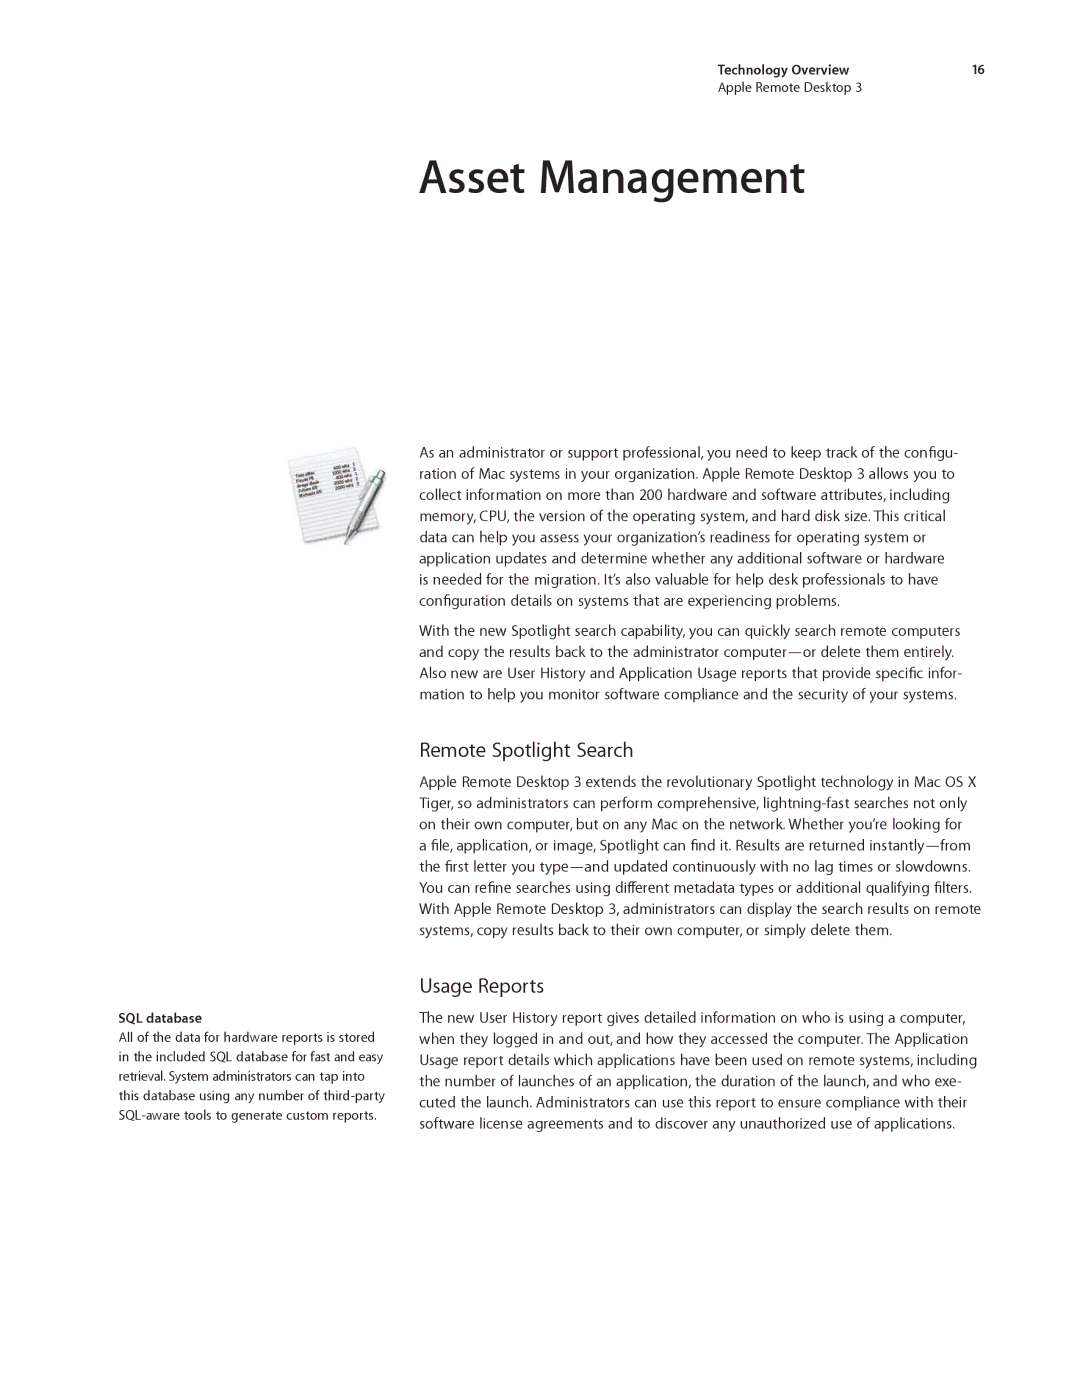 Apple ARD31 manual Asset Management, Remote Spotlight Search, Usage Reports, SQL database 